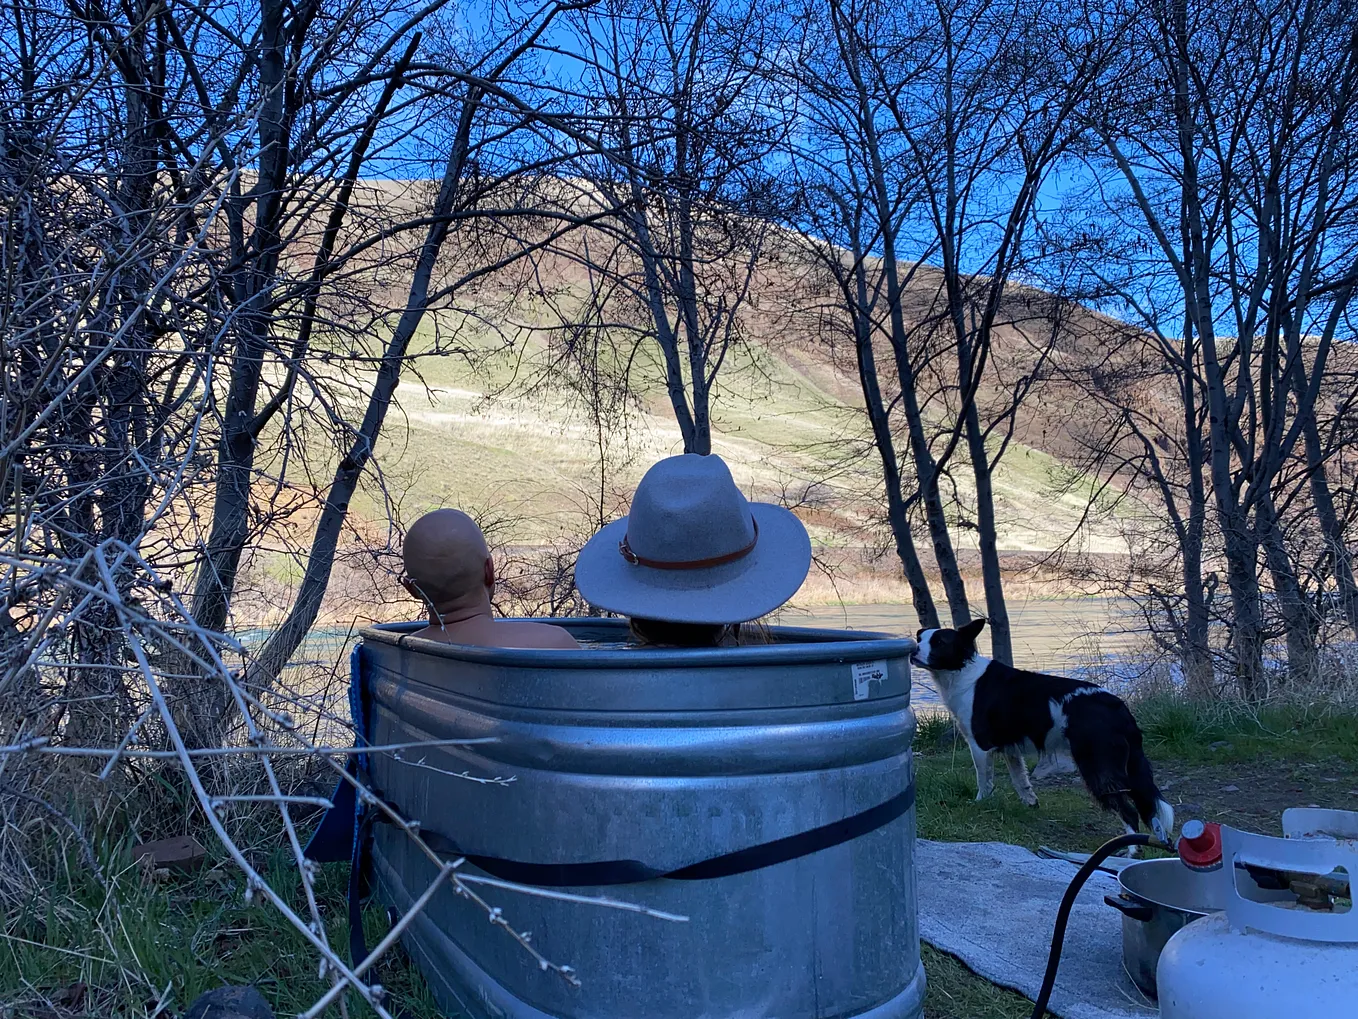 Author and girlfriend sitting in metal tank hot tub looking out at river.